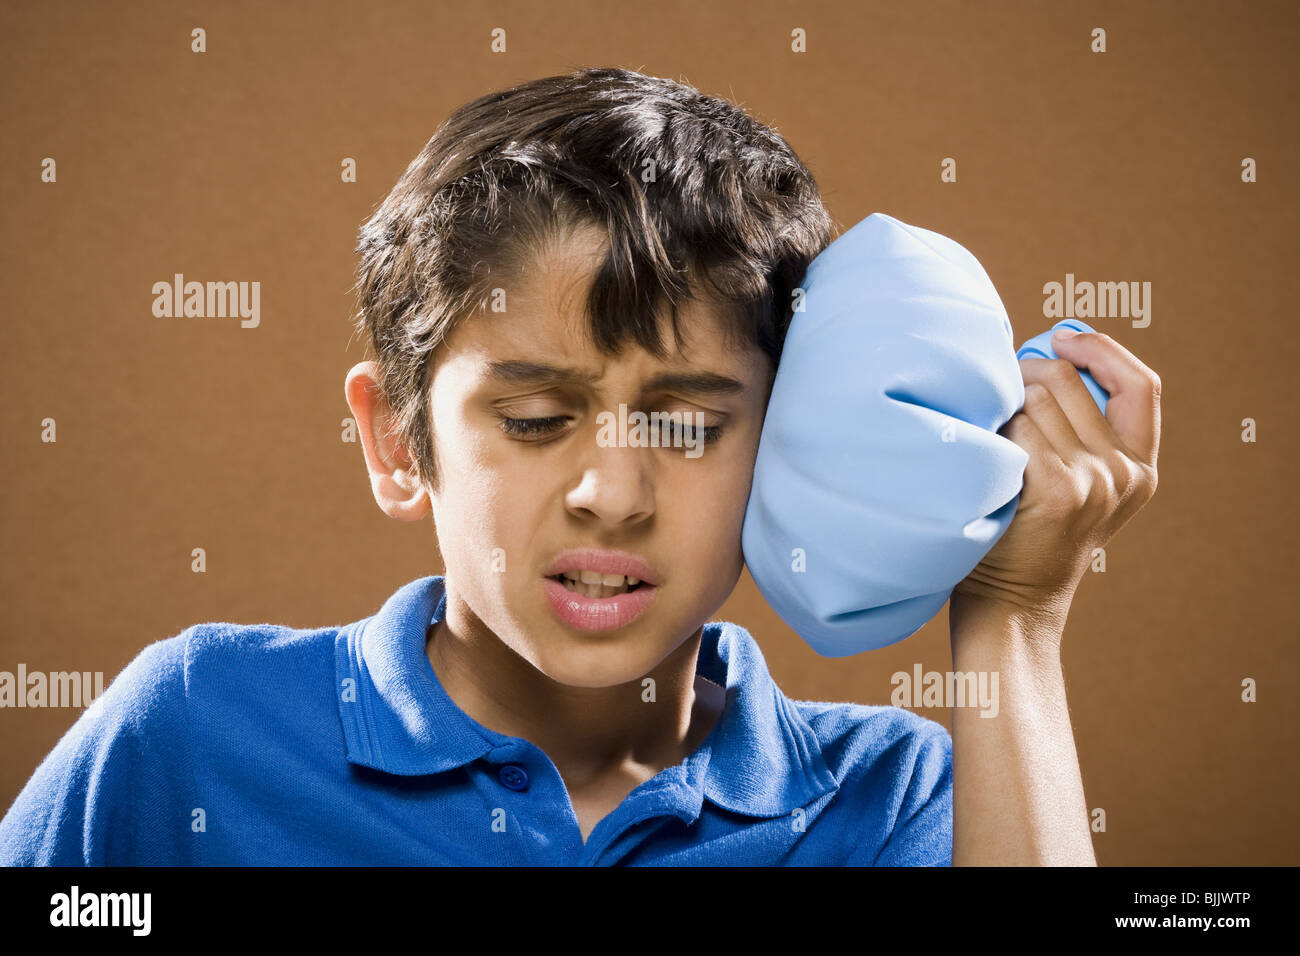 Boy holding ice pack to head Stock Photo